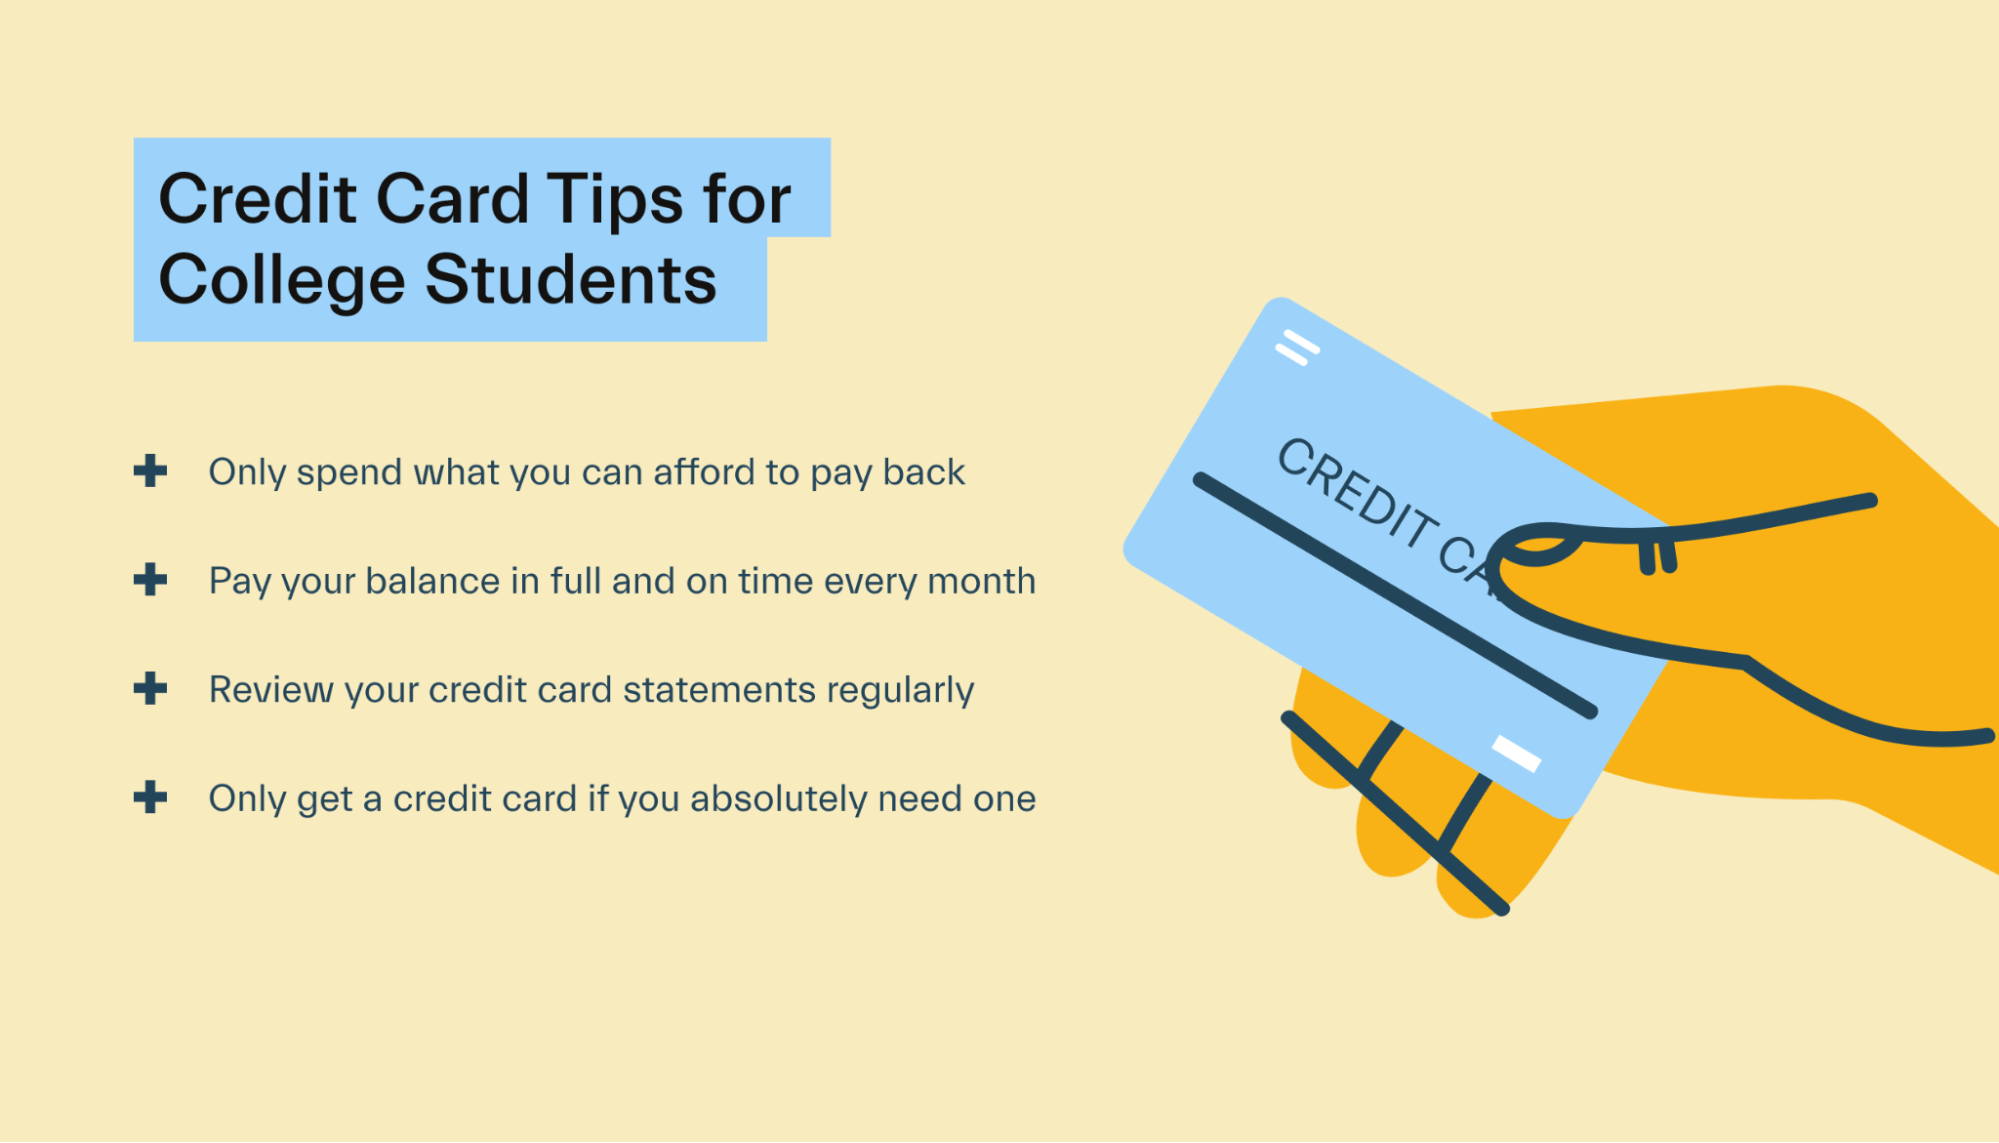 Credit Card Tips For College Students